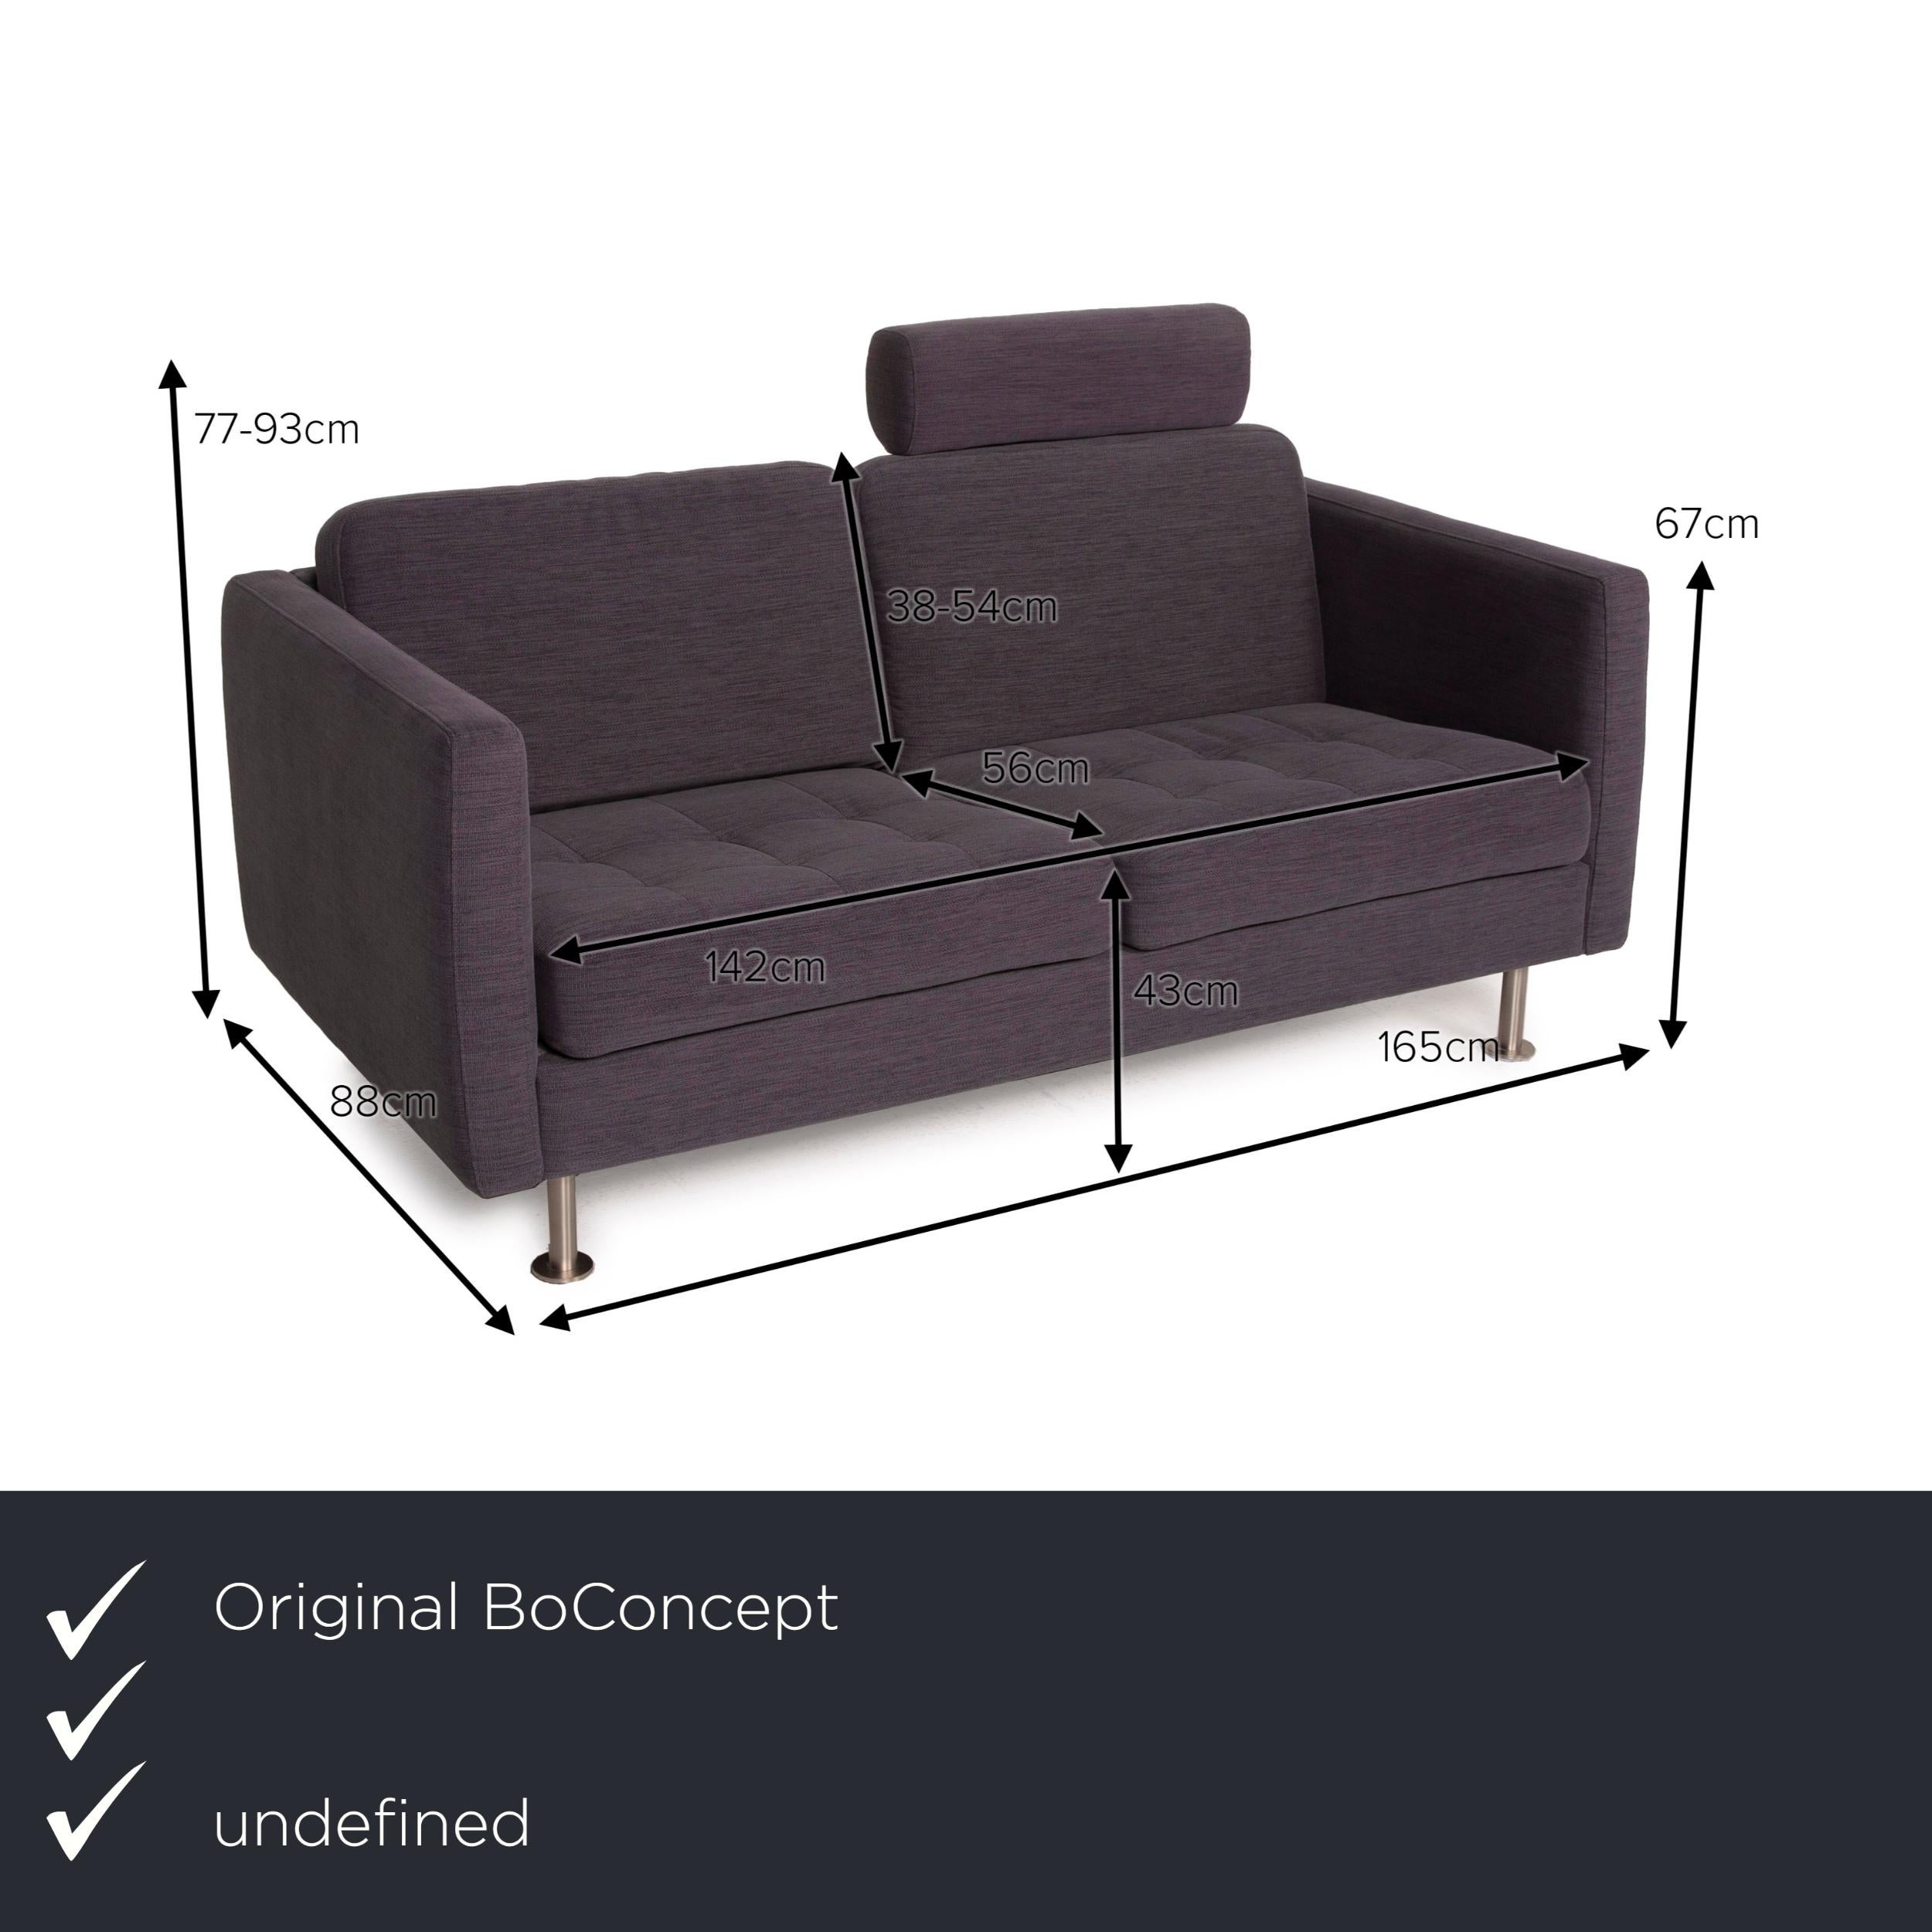 We present to you a BoConcept Osaka fabric sofa set gray 2x two-seater 1x stool set.


 Product measurements in centimeters:
 

Depth: 88
Width: 165
Height: 93
Seat height: 43
Rest height: 67
Seat depth: 56
Seat width: 142
Back height: